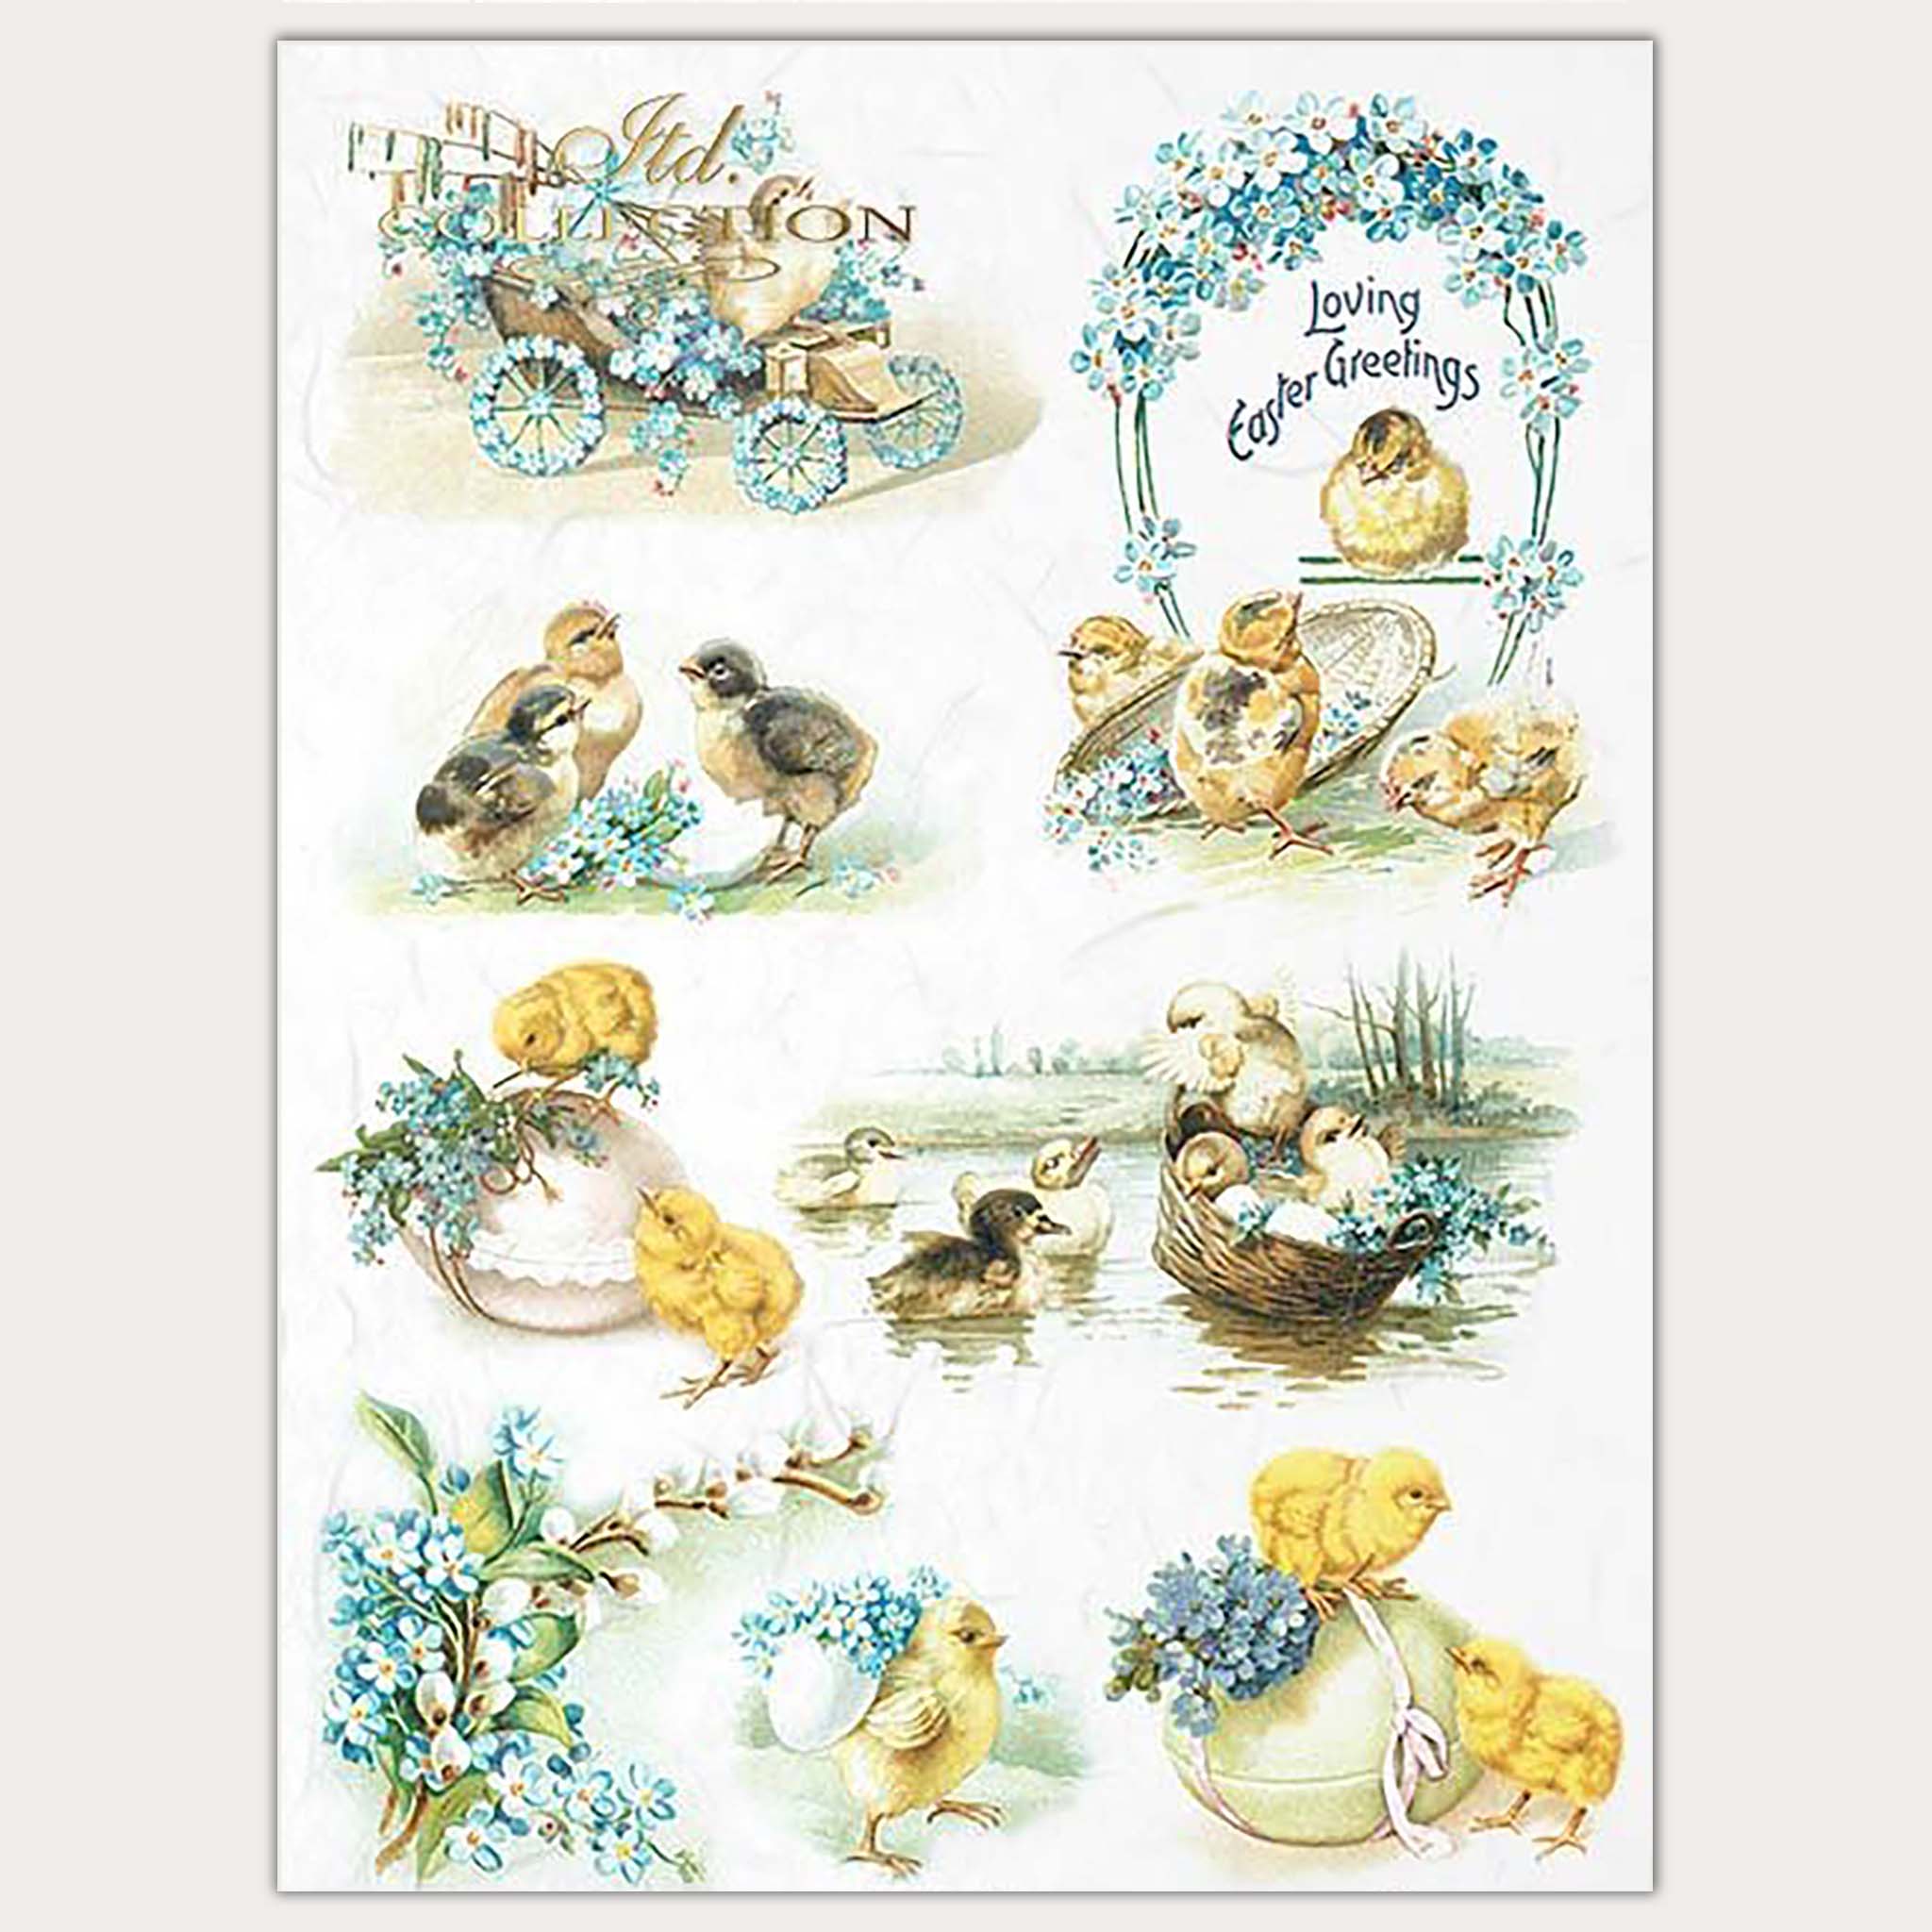 A4 rice paper designs that feature baby chicks, eggs, and bouquets of blue flowers on a carriage, wrapped around the eggs, and in an arch.